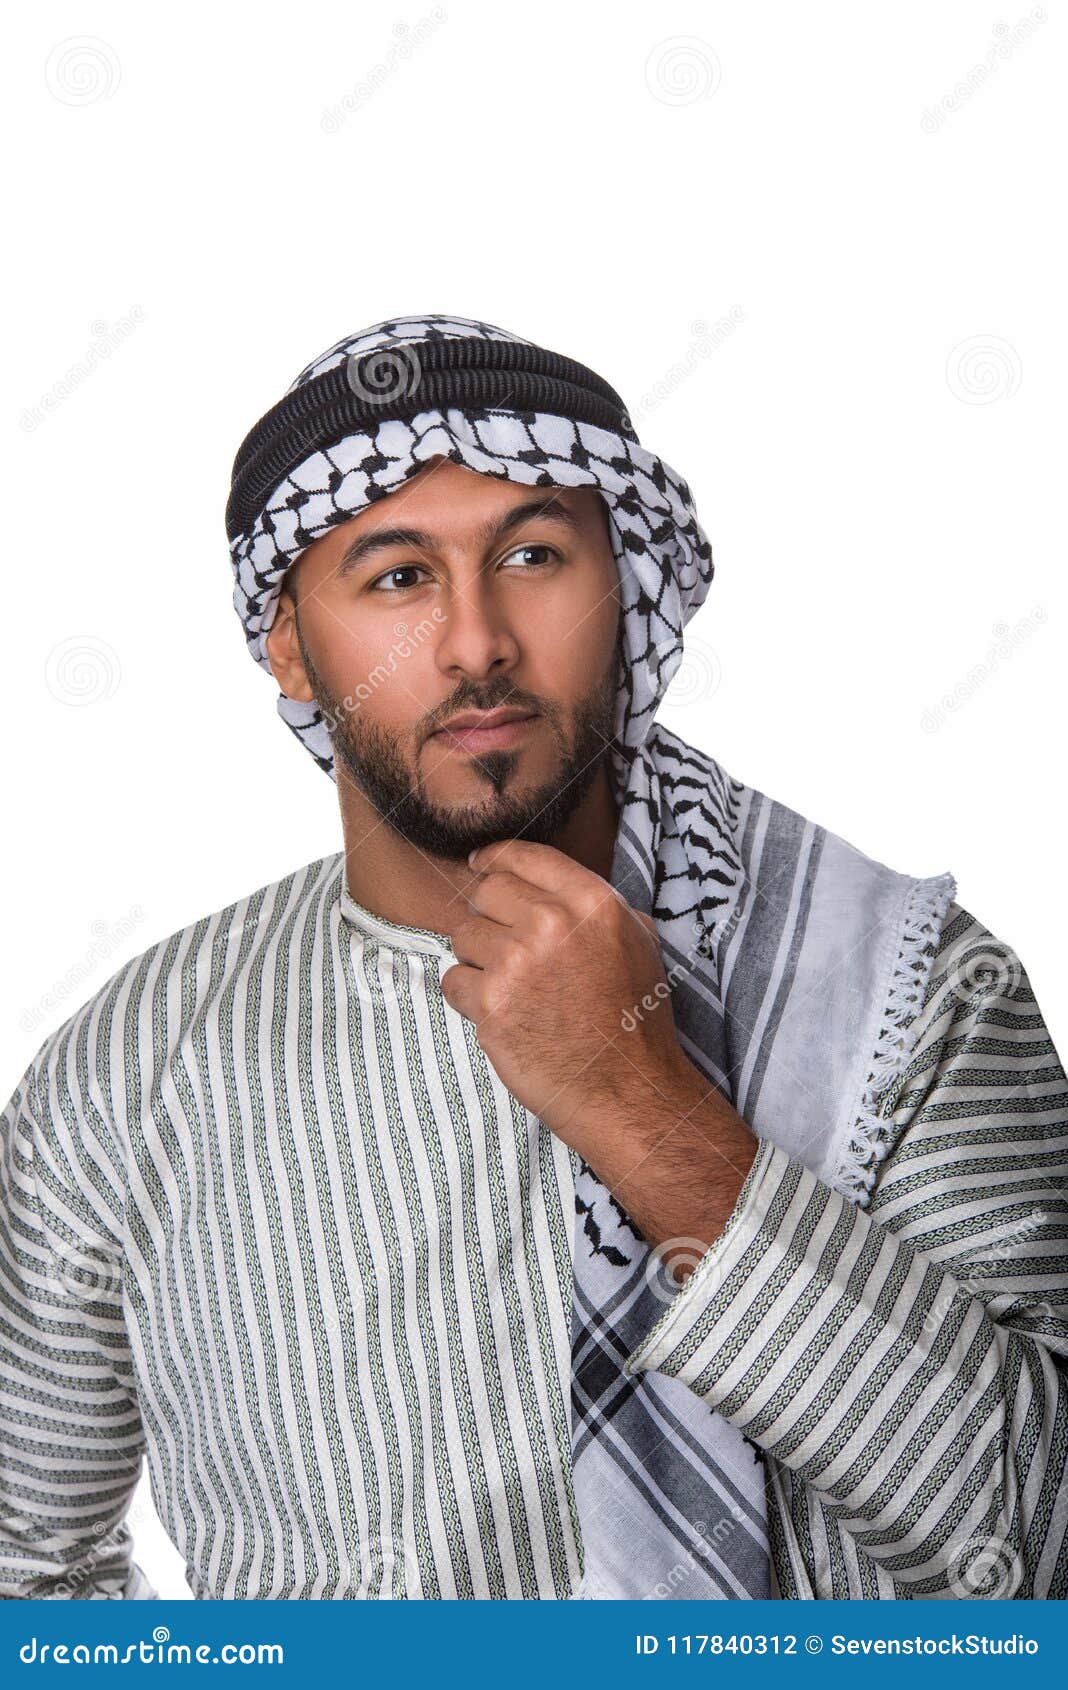 palestinian arab man in traditional costume and doing a thinking gesture